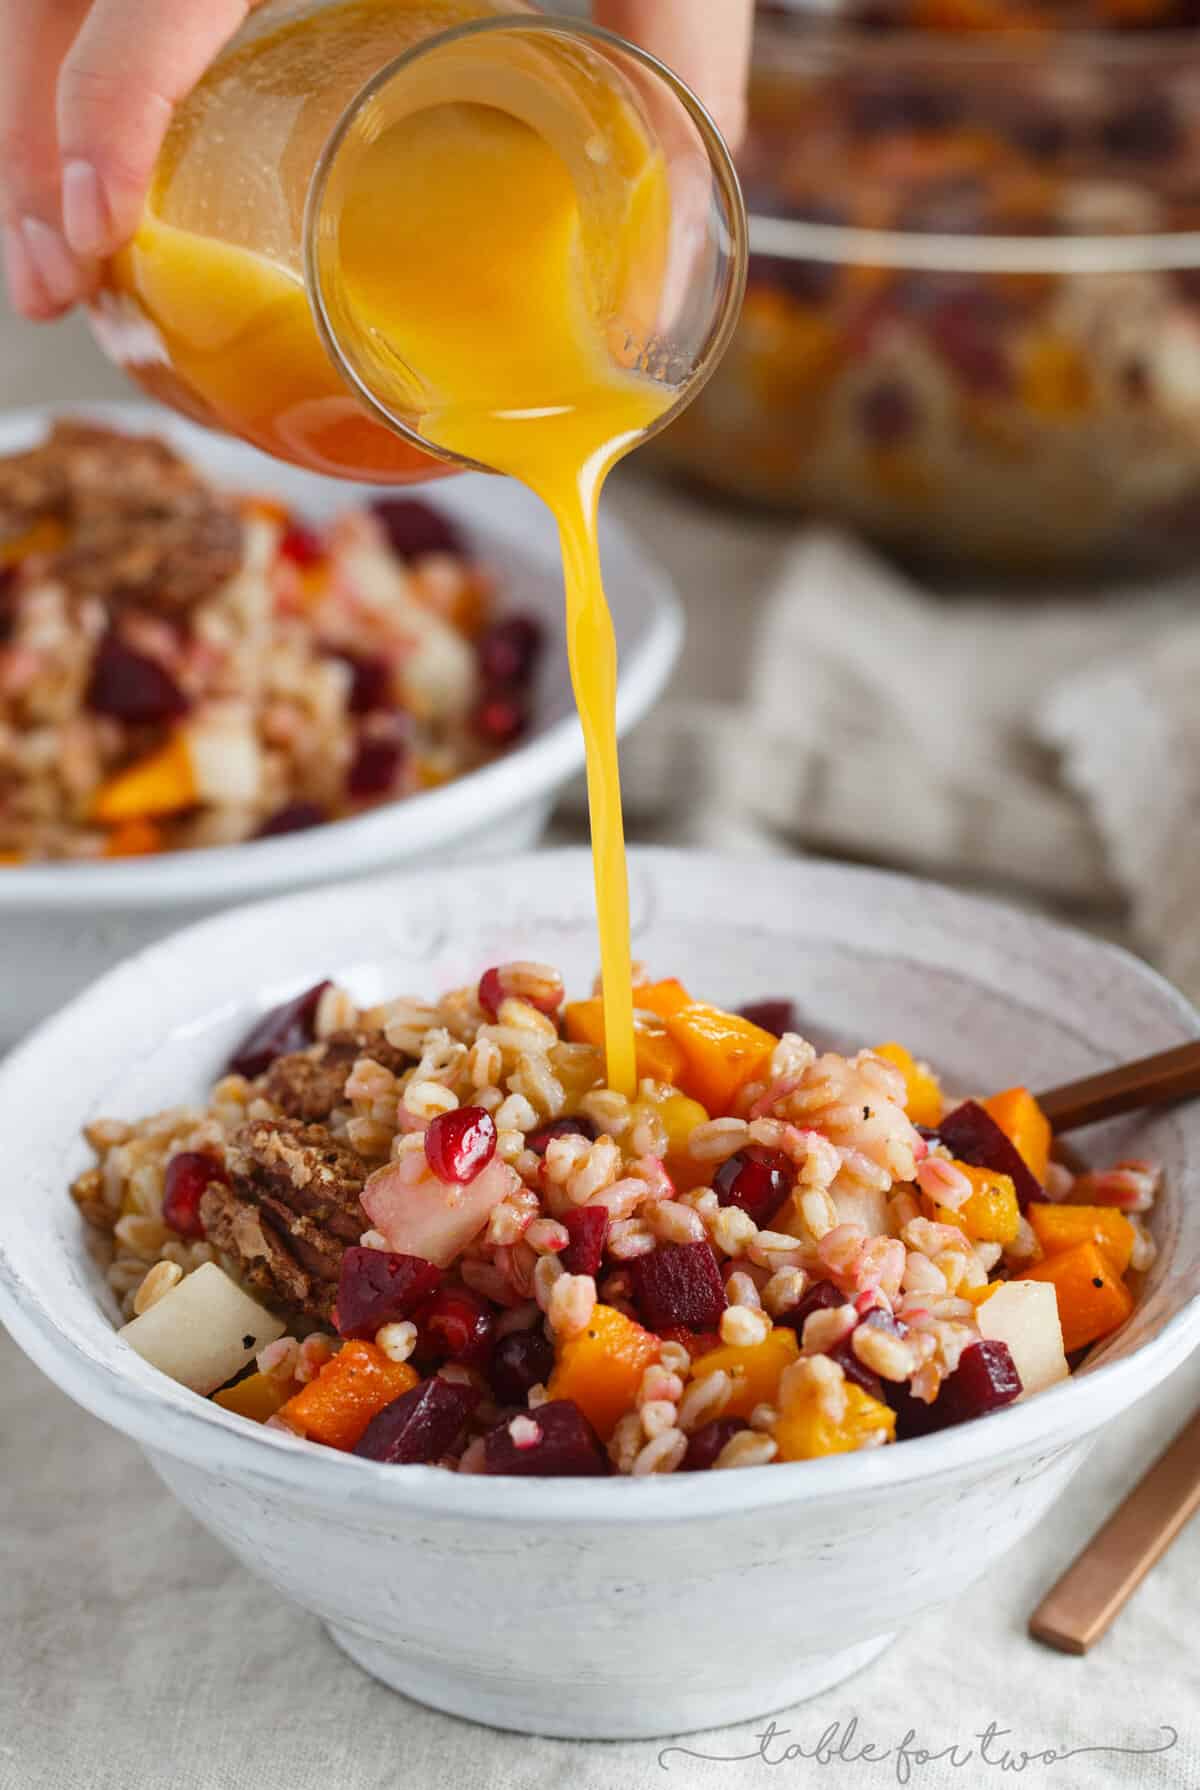 This winter farro salad can turn any drab winter day to a bright one! The farro salad is full of vibrant colors and ingredients and topped off with a sweet and tangy blood orange vinaigrette that finishes the salad perfectly!